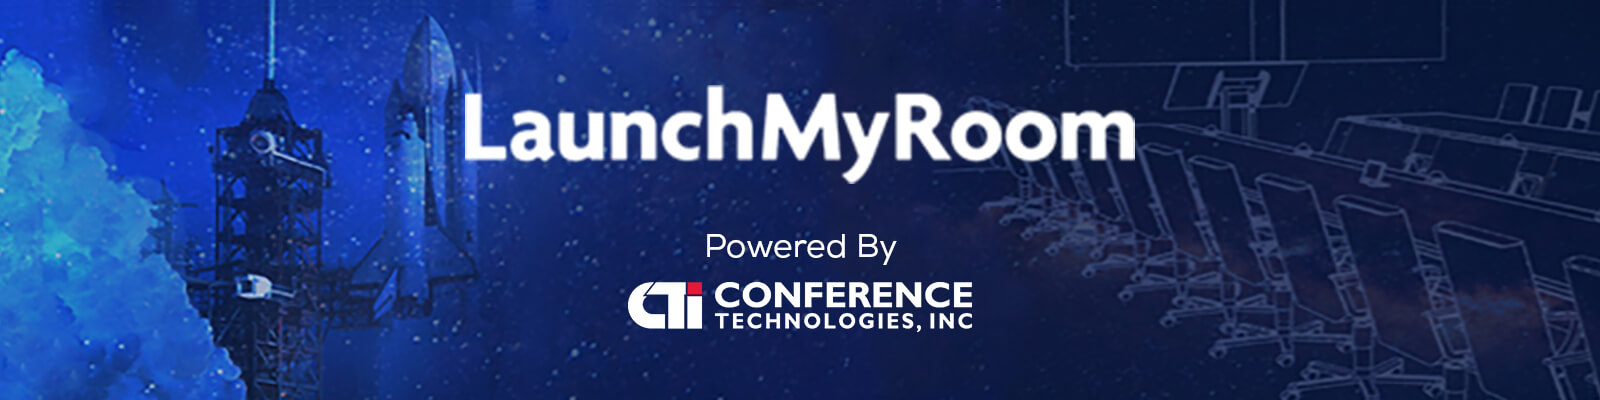 Launch My Room Powered by Conference Technologies, Inc.